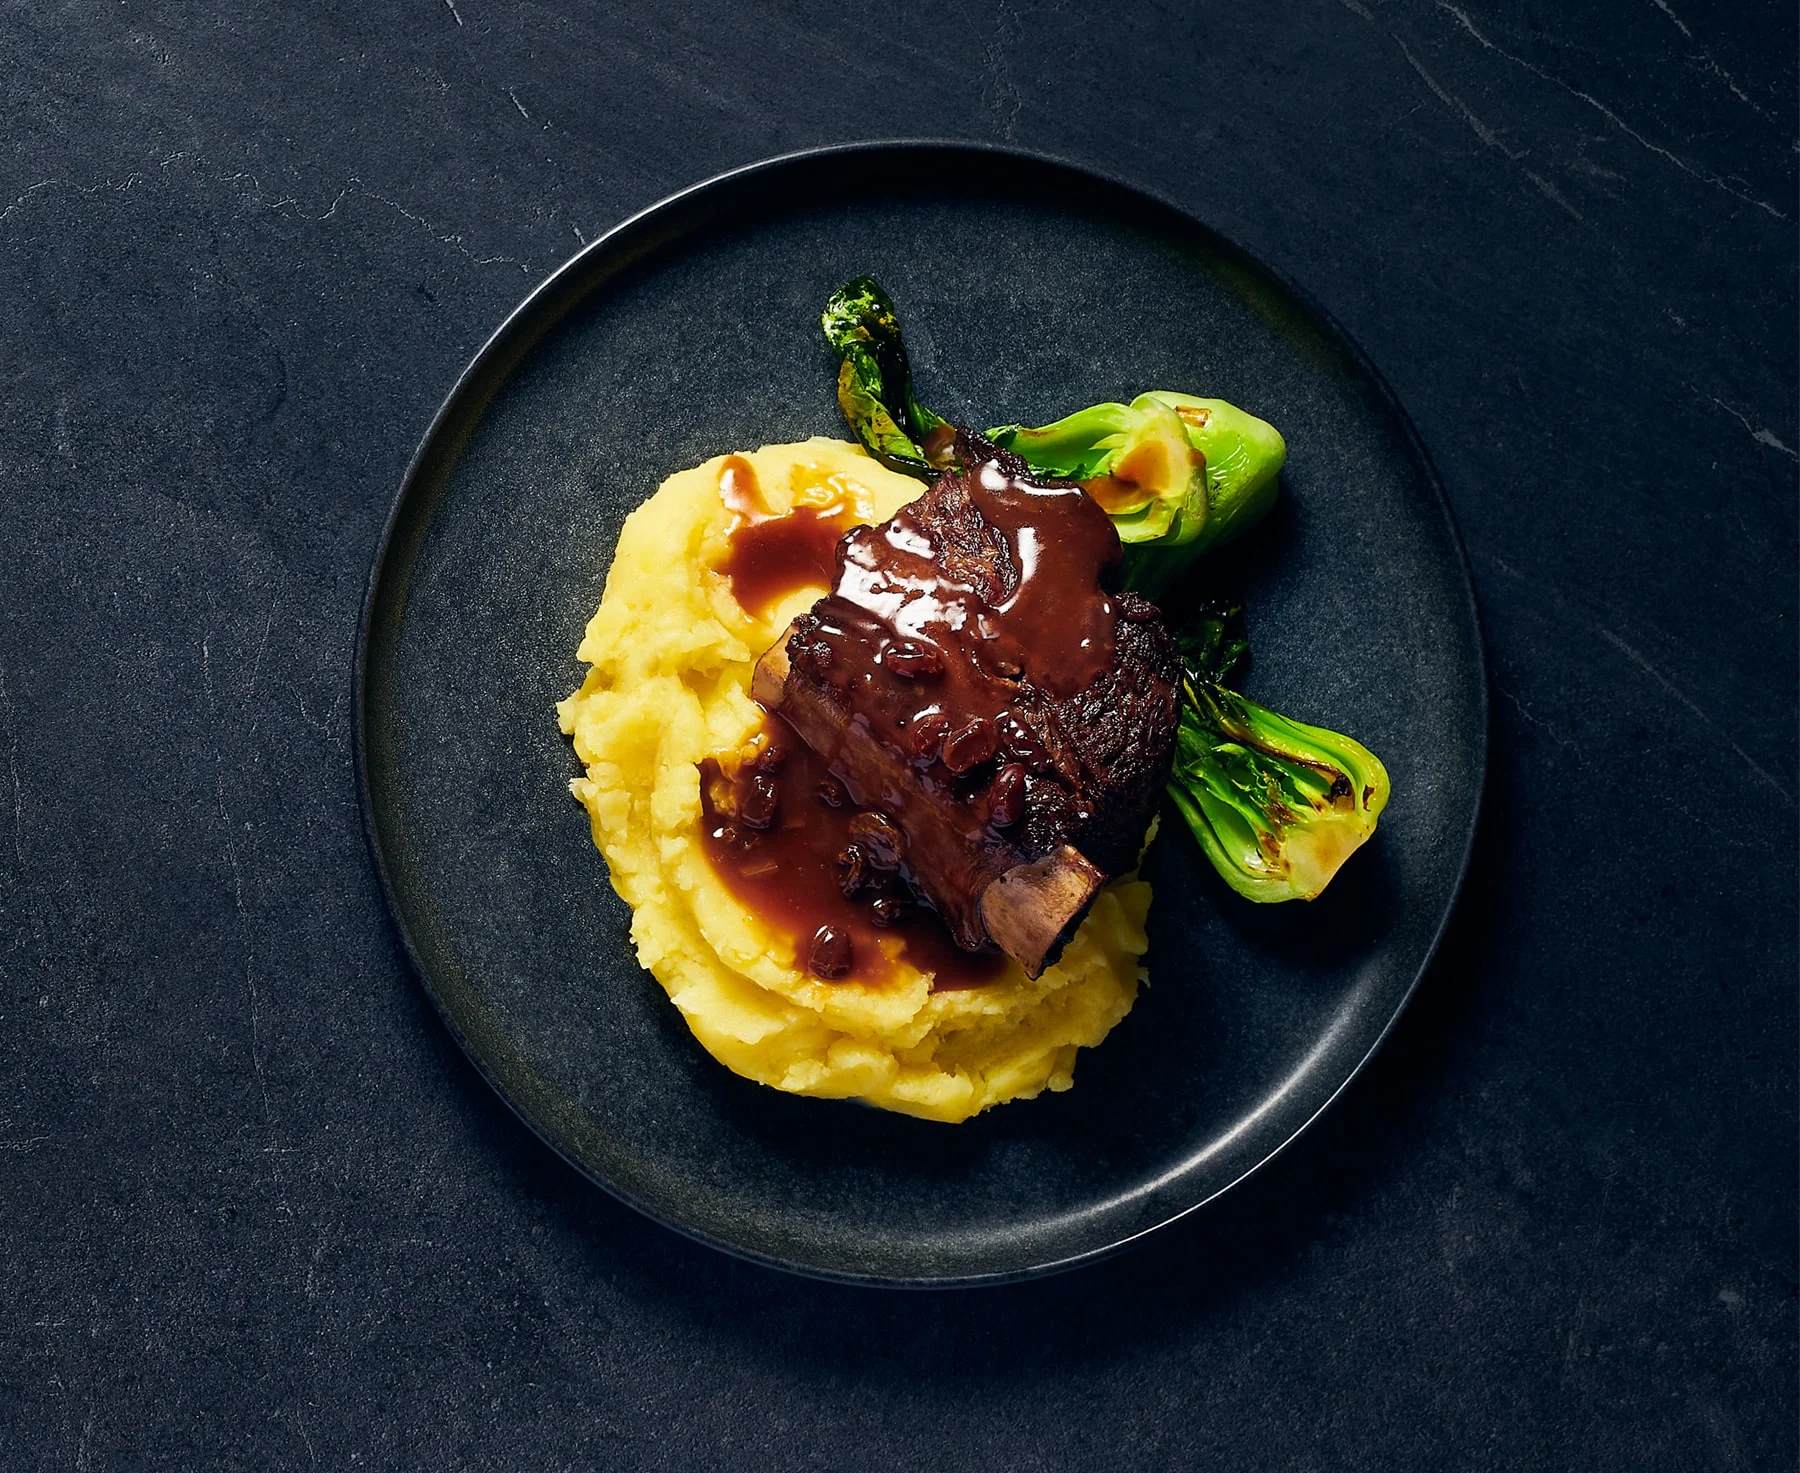 Mashed potatoes with ribeye, gravy, and leeks on a black plate and black background